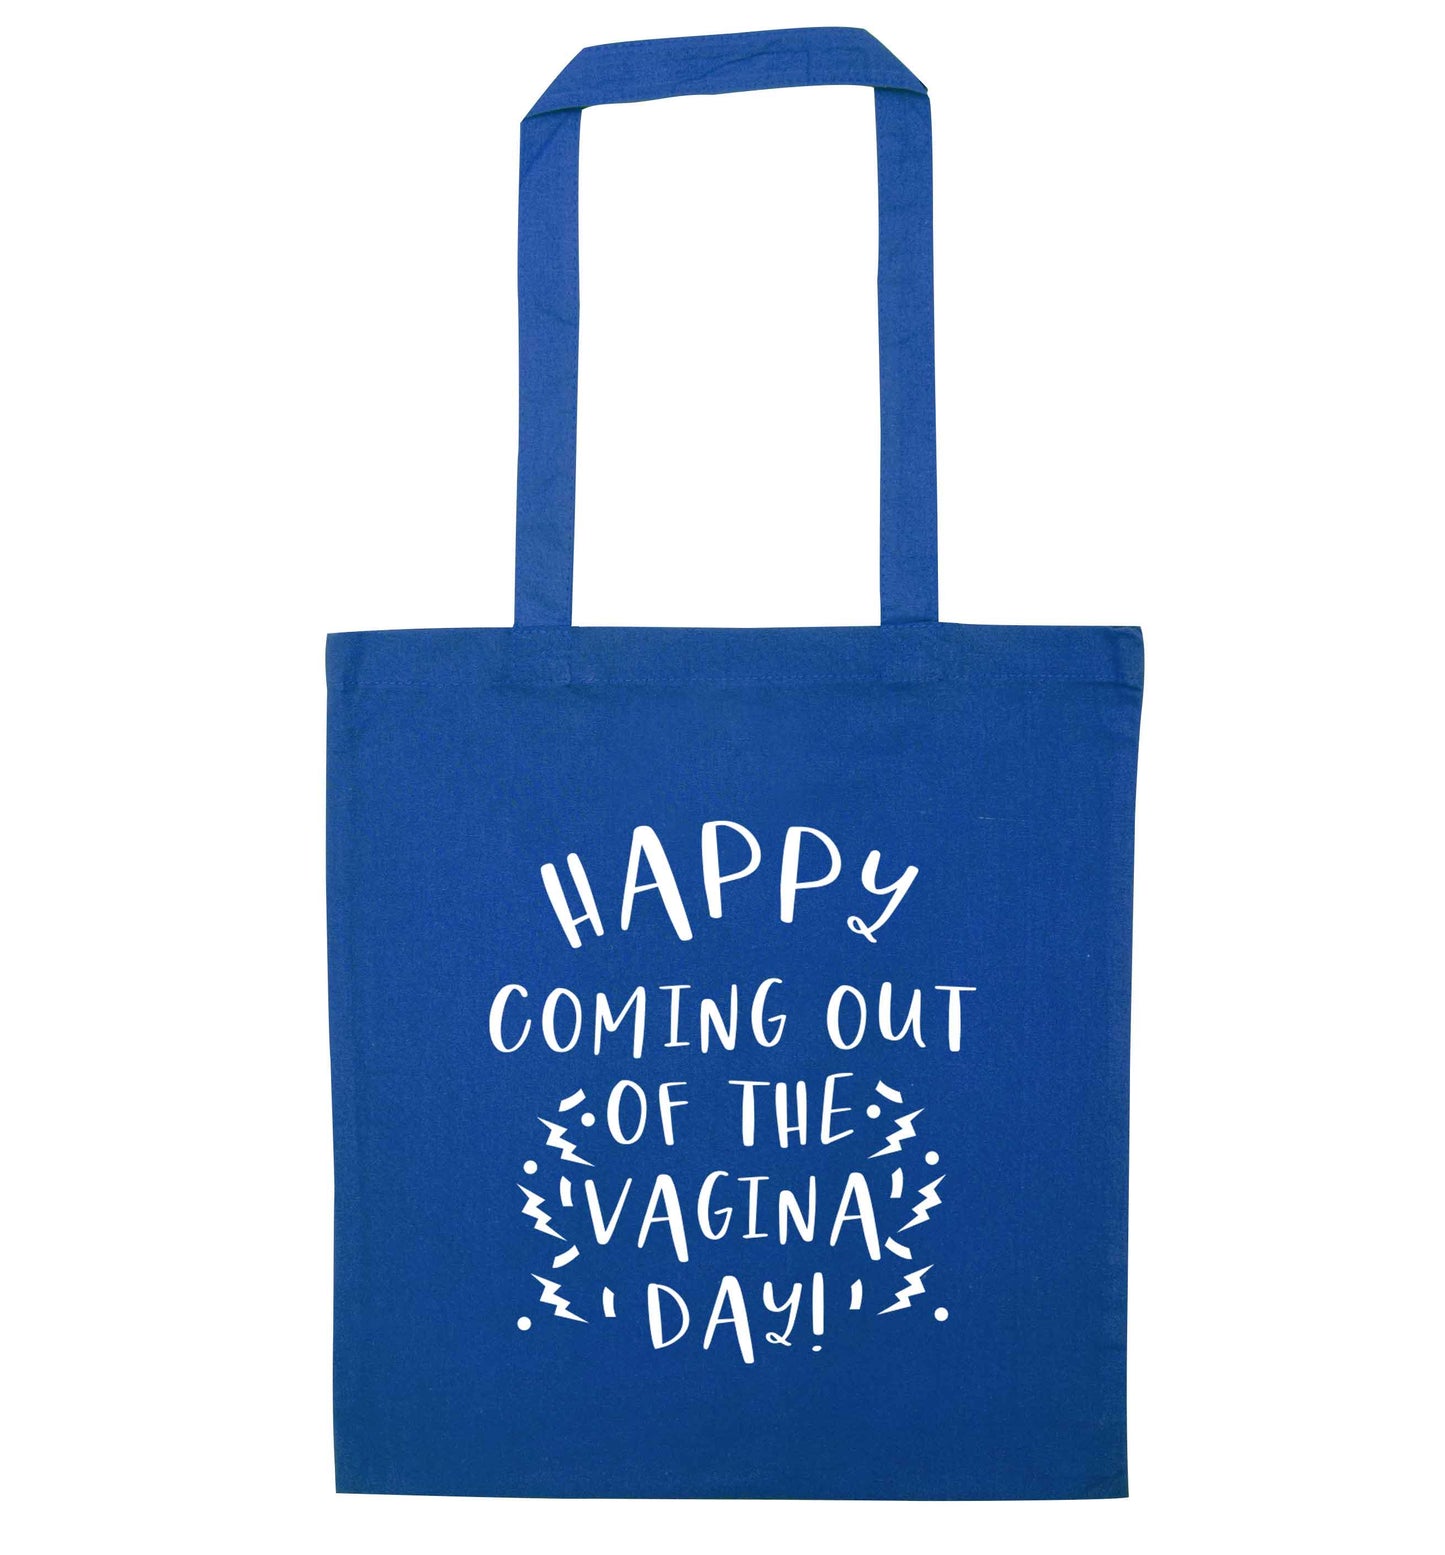 Happy coming out of the vagina day blue tote bag